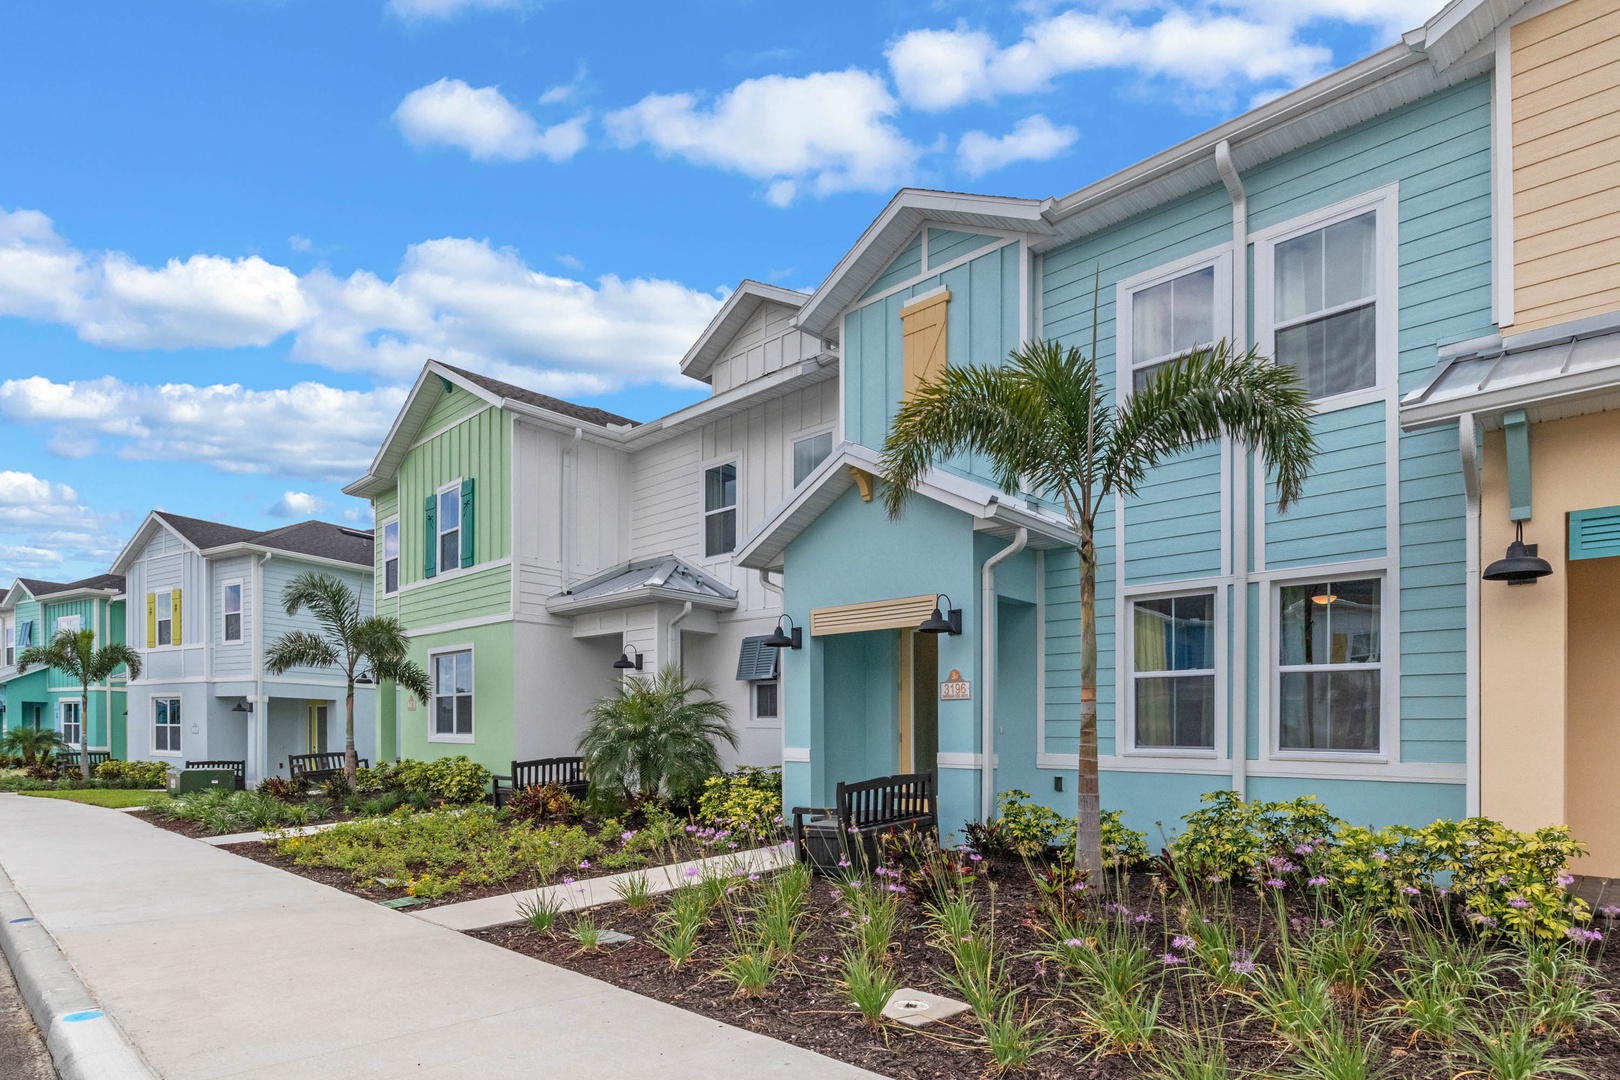 Welcome to Turquoise Breeze, a true blue Margaritaville jewel!